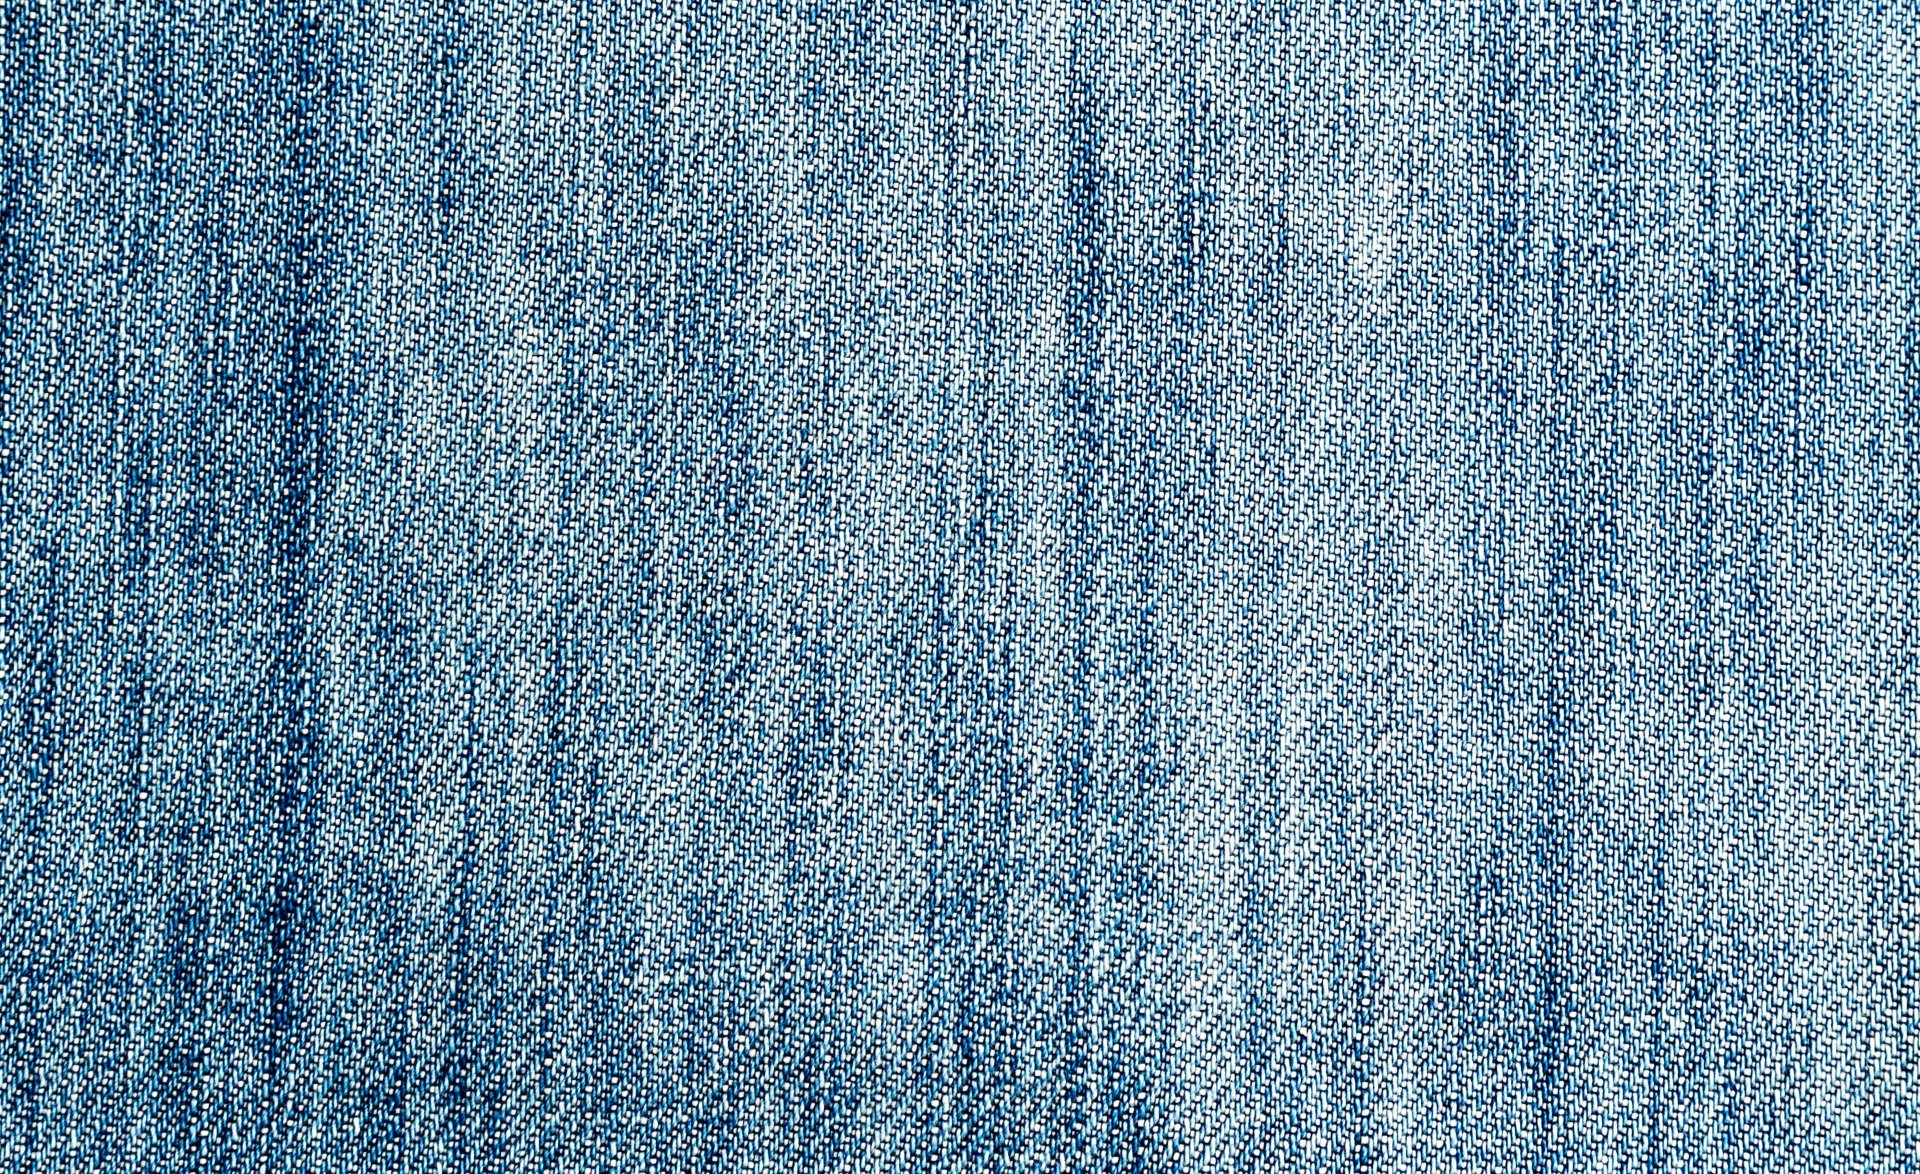 28+ Denim Wallpapers: HD, 4K, 5K for PC and Mobile | Download free images  for iPhone, Android